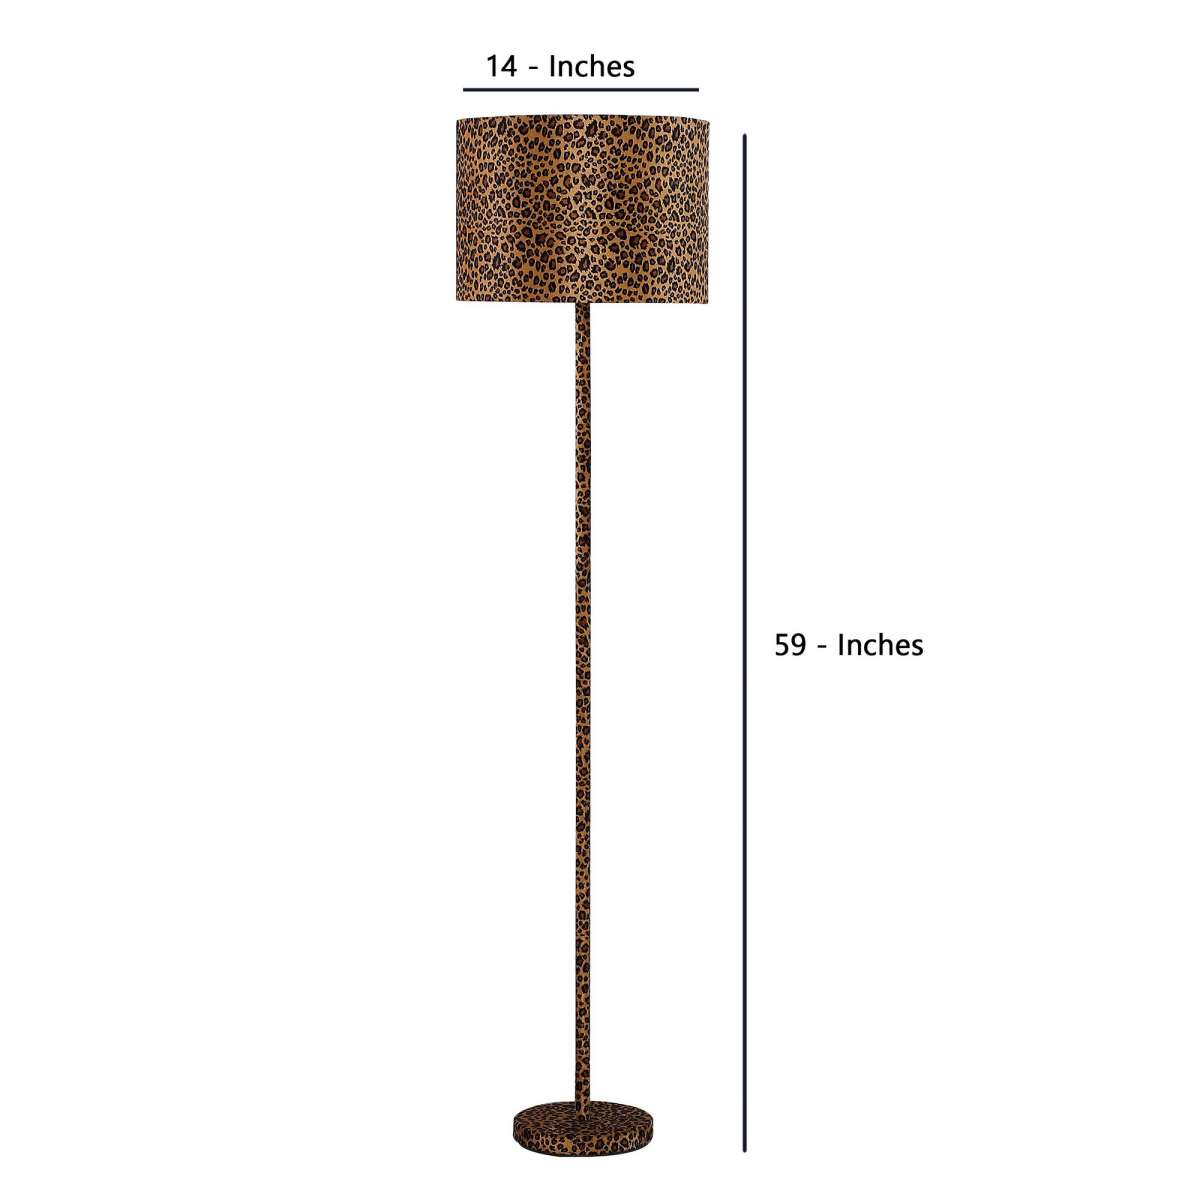 Fabric Wrapped Floor Lamp With Dotted Animal Print, Brown And Black By Benzara